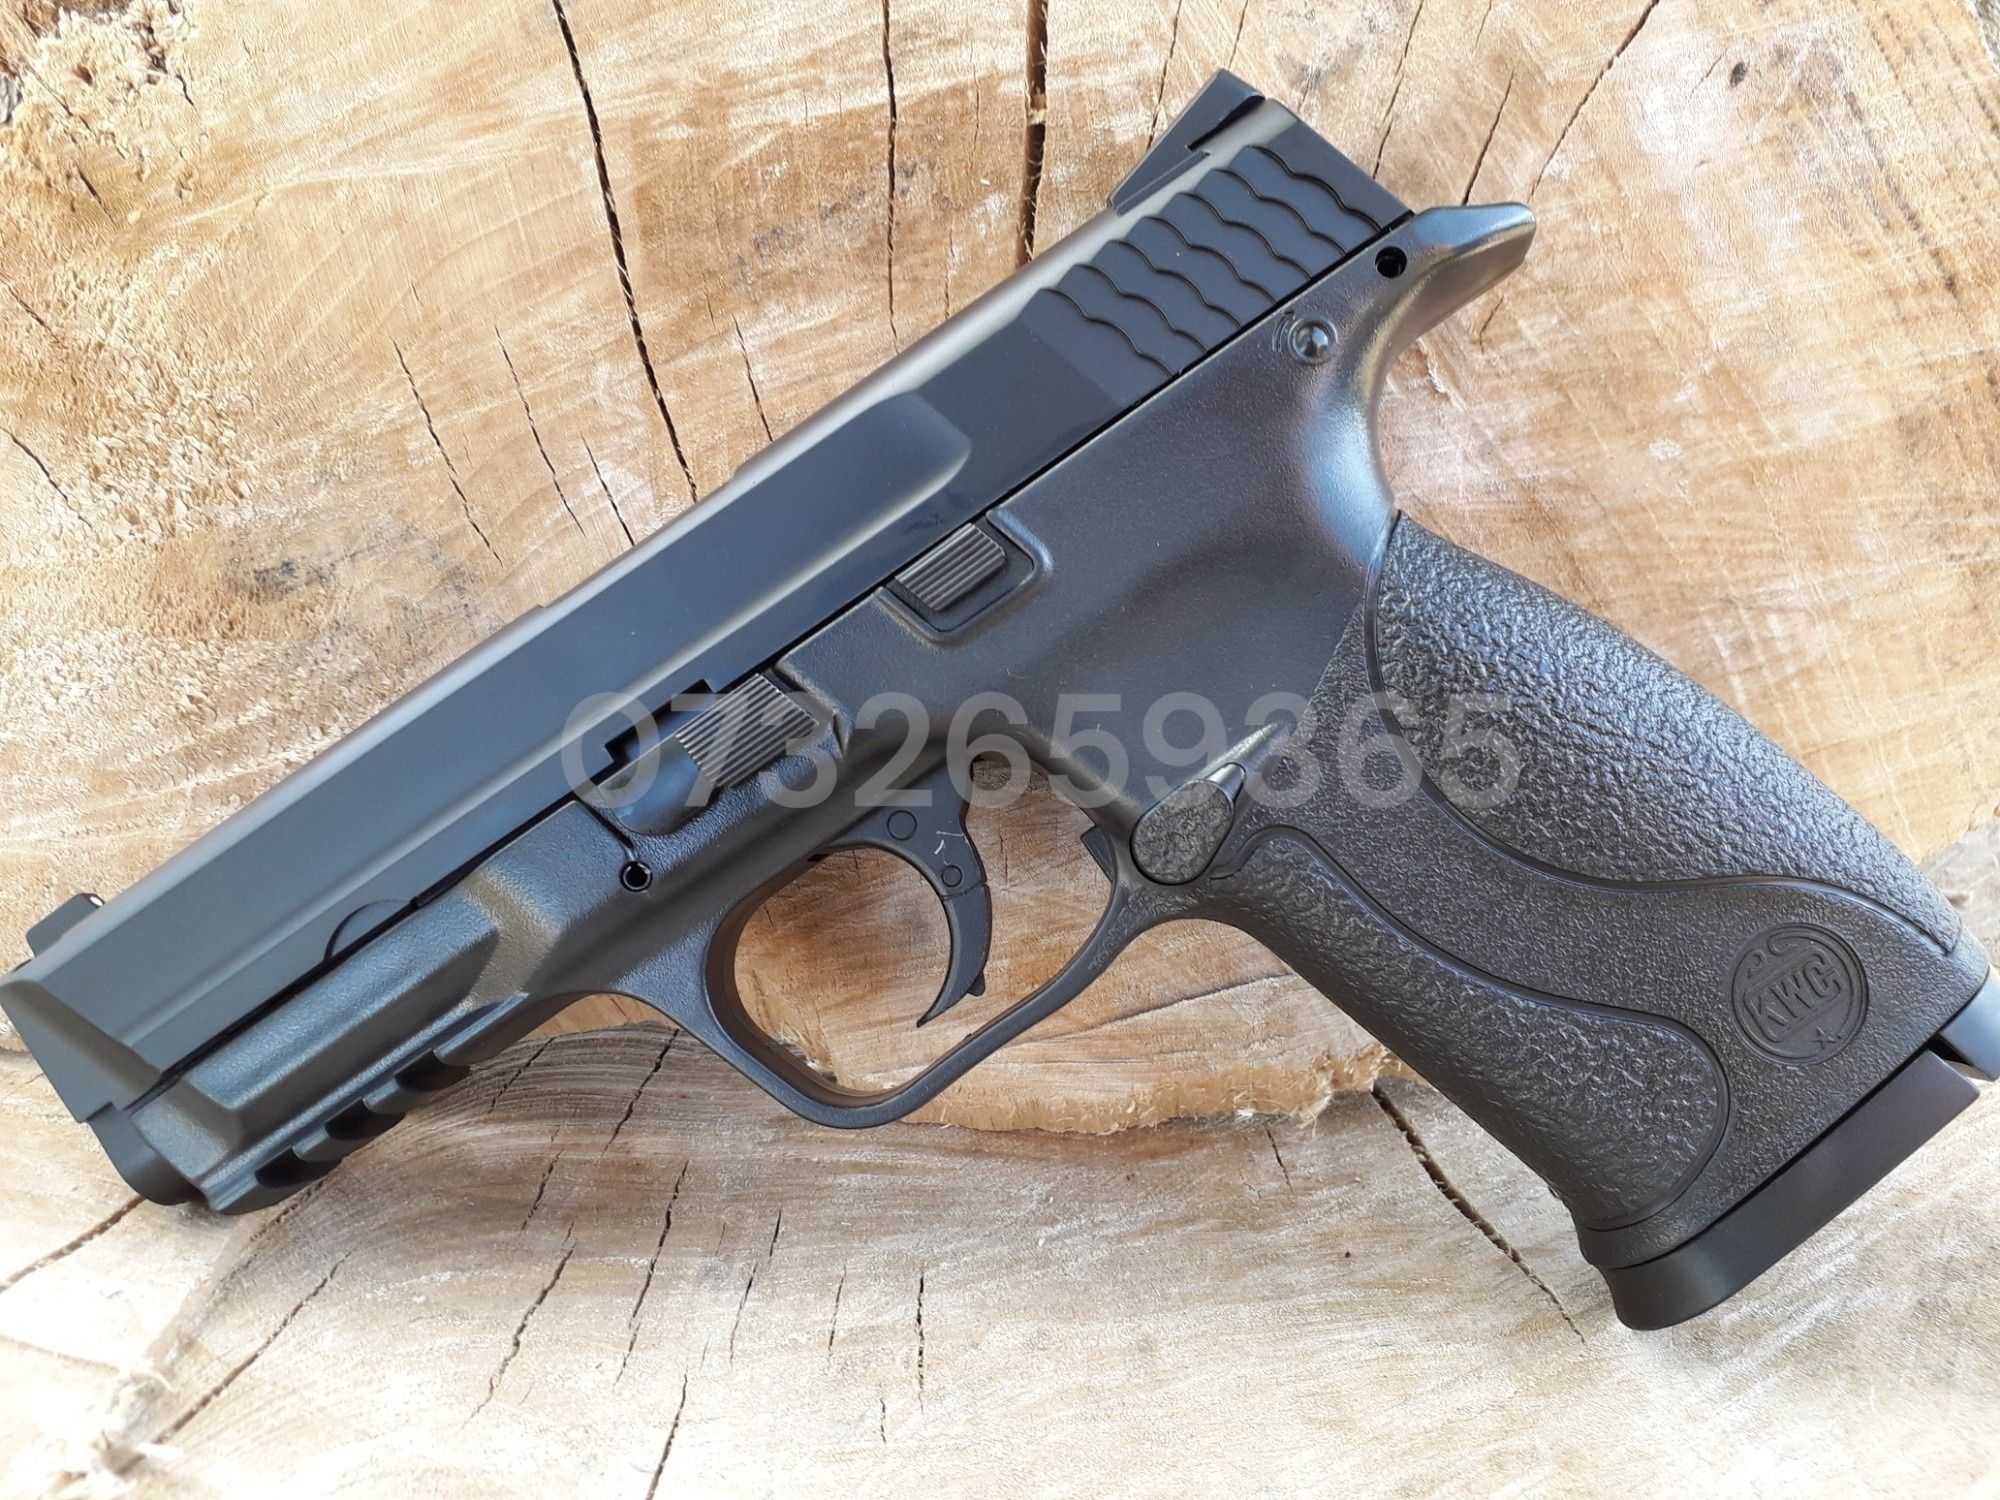 Reducere Smith&Wesson pistol airsoft CO2 NBB slide metal puternic NOU